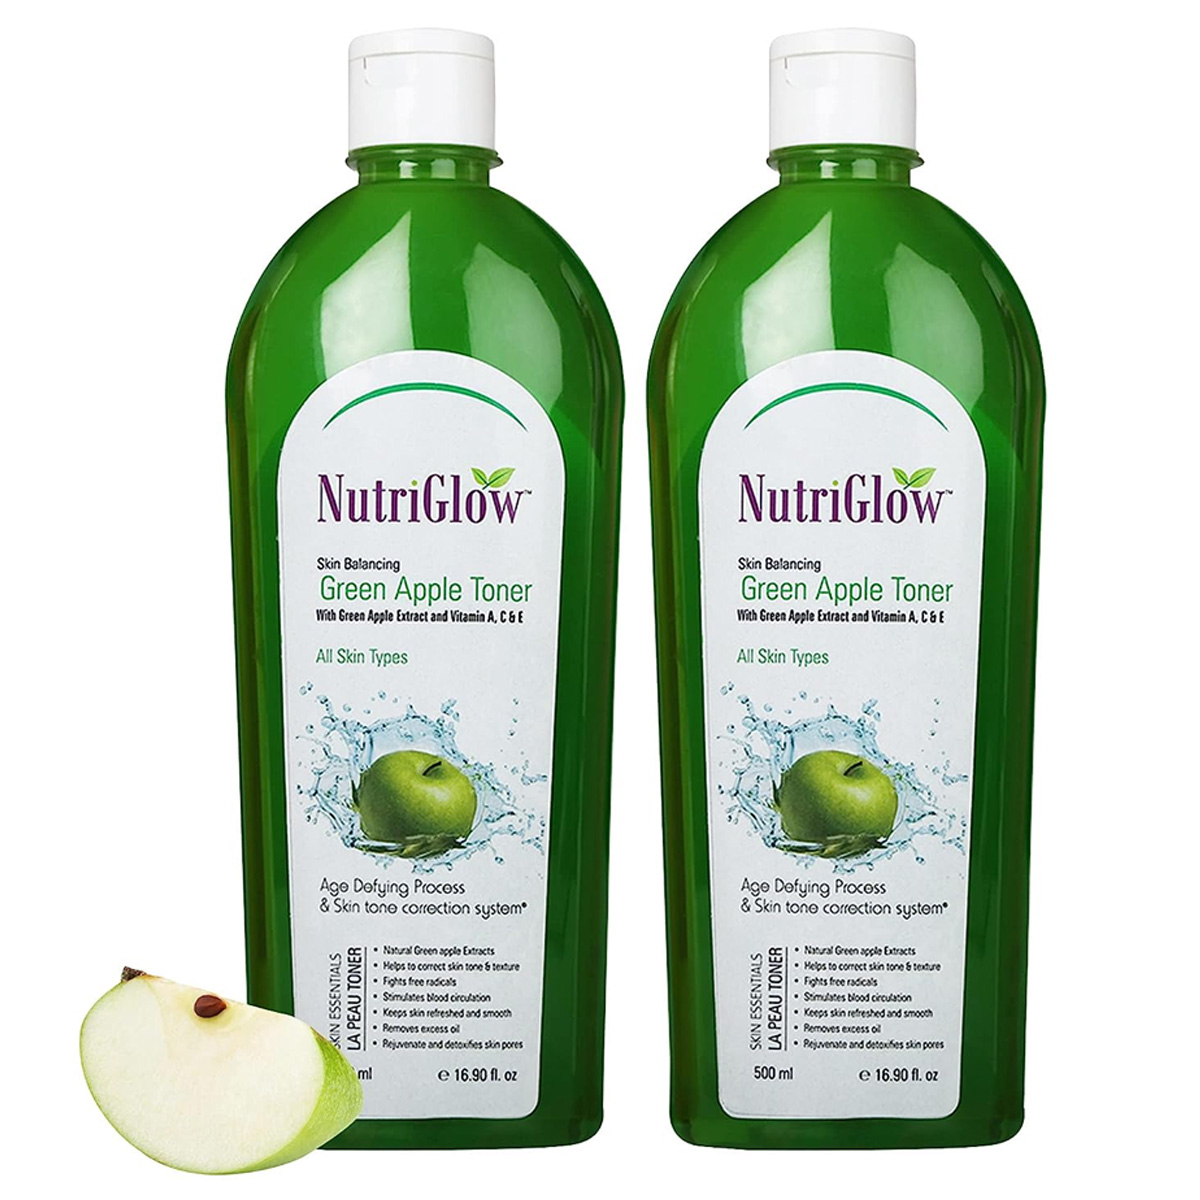 NutriGlow Green Apple Toner With Green Apple Extract And Vitamin A, C & E, 500ml Each, Pack of 2